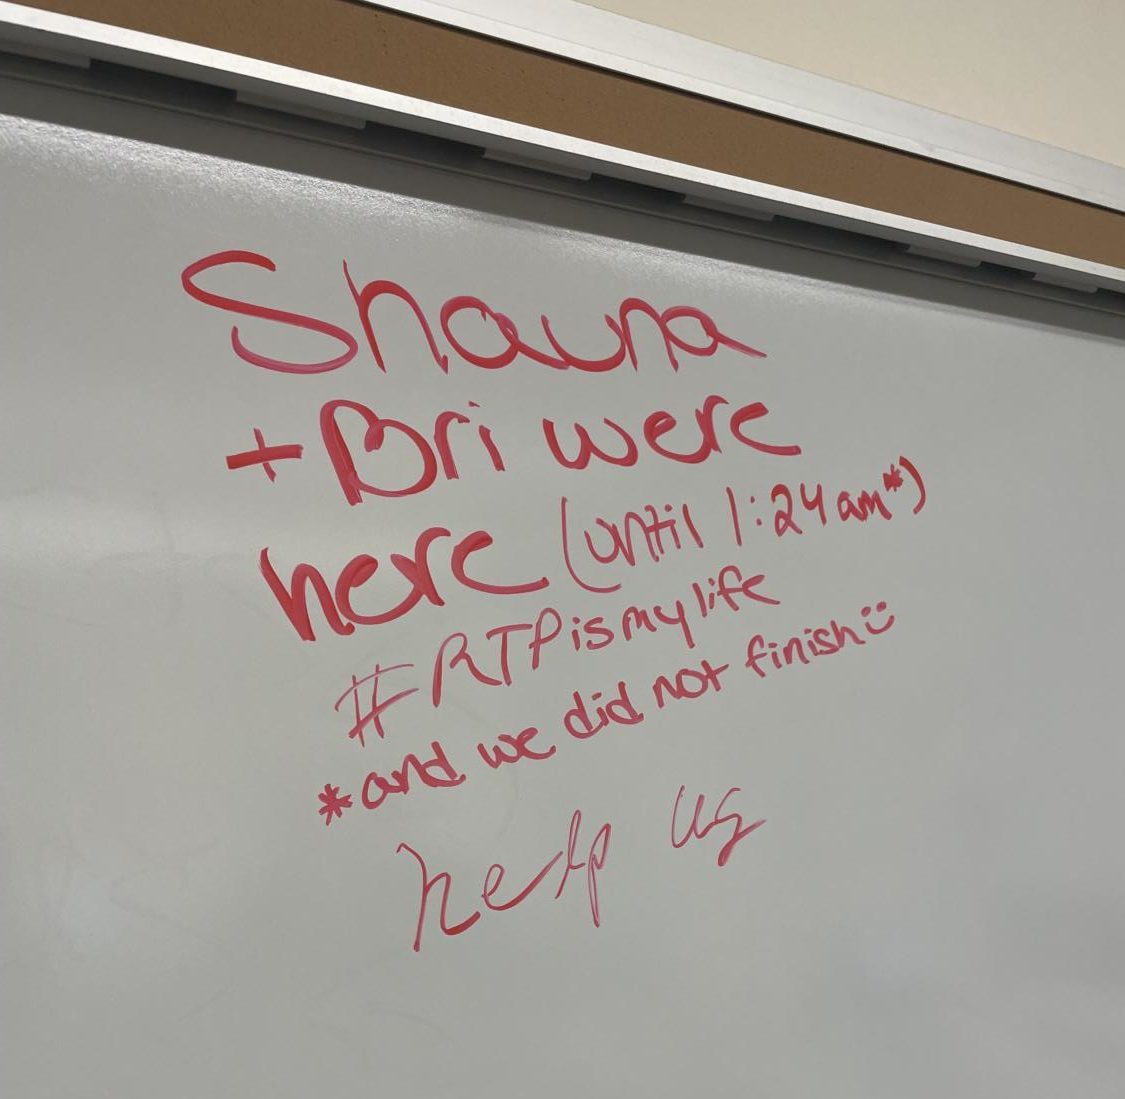 A whiteboard with writing on it in red marker that reads: Shauna + Bri were here until 1:24 am #RTPismylife and we did not finish help us